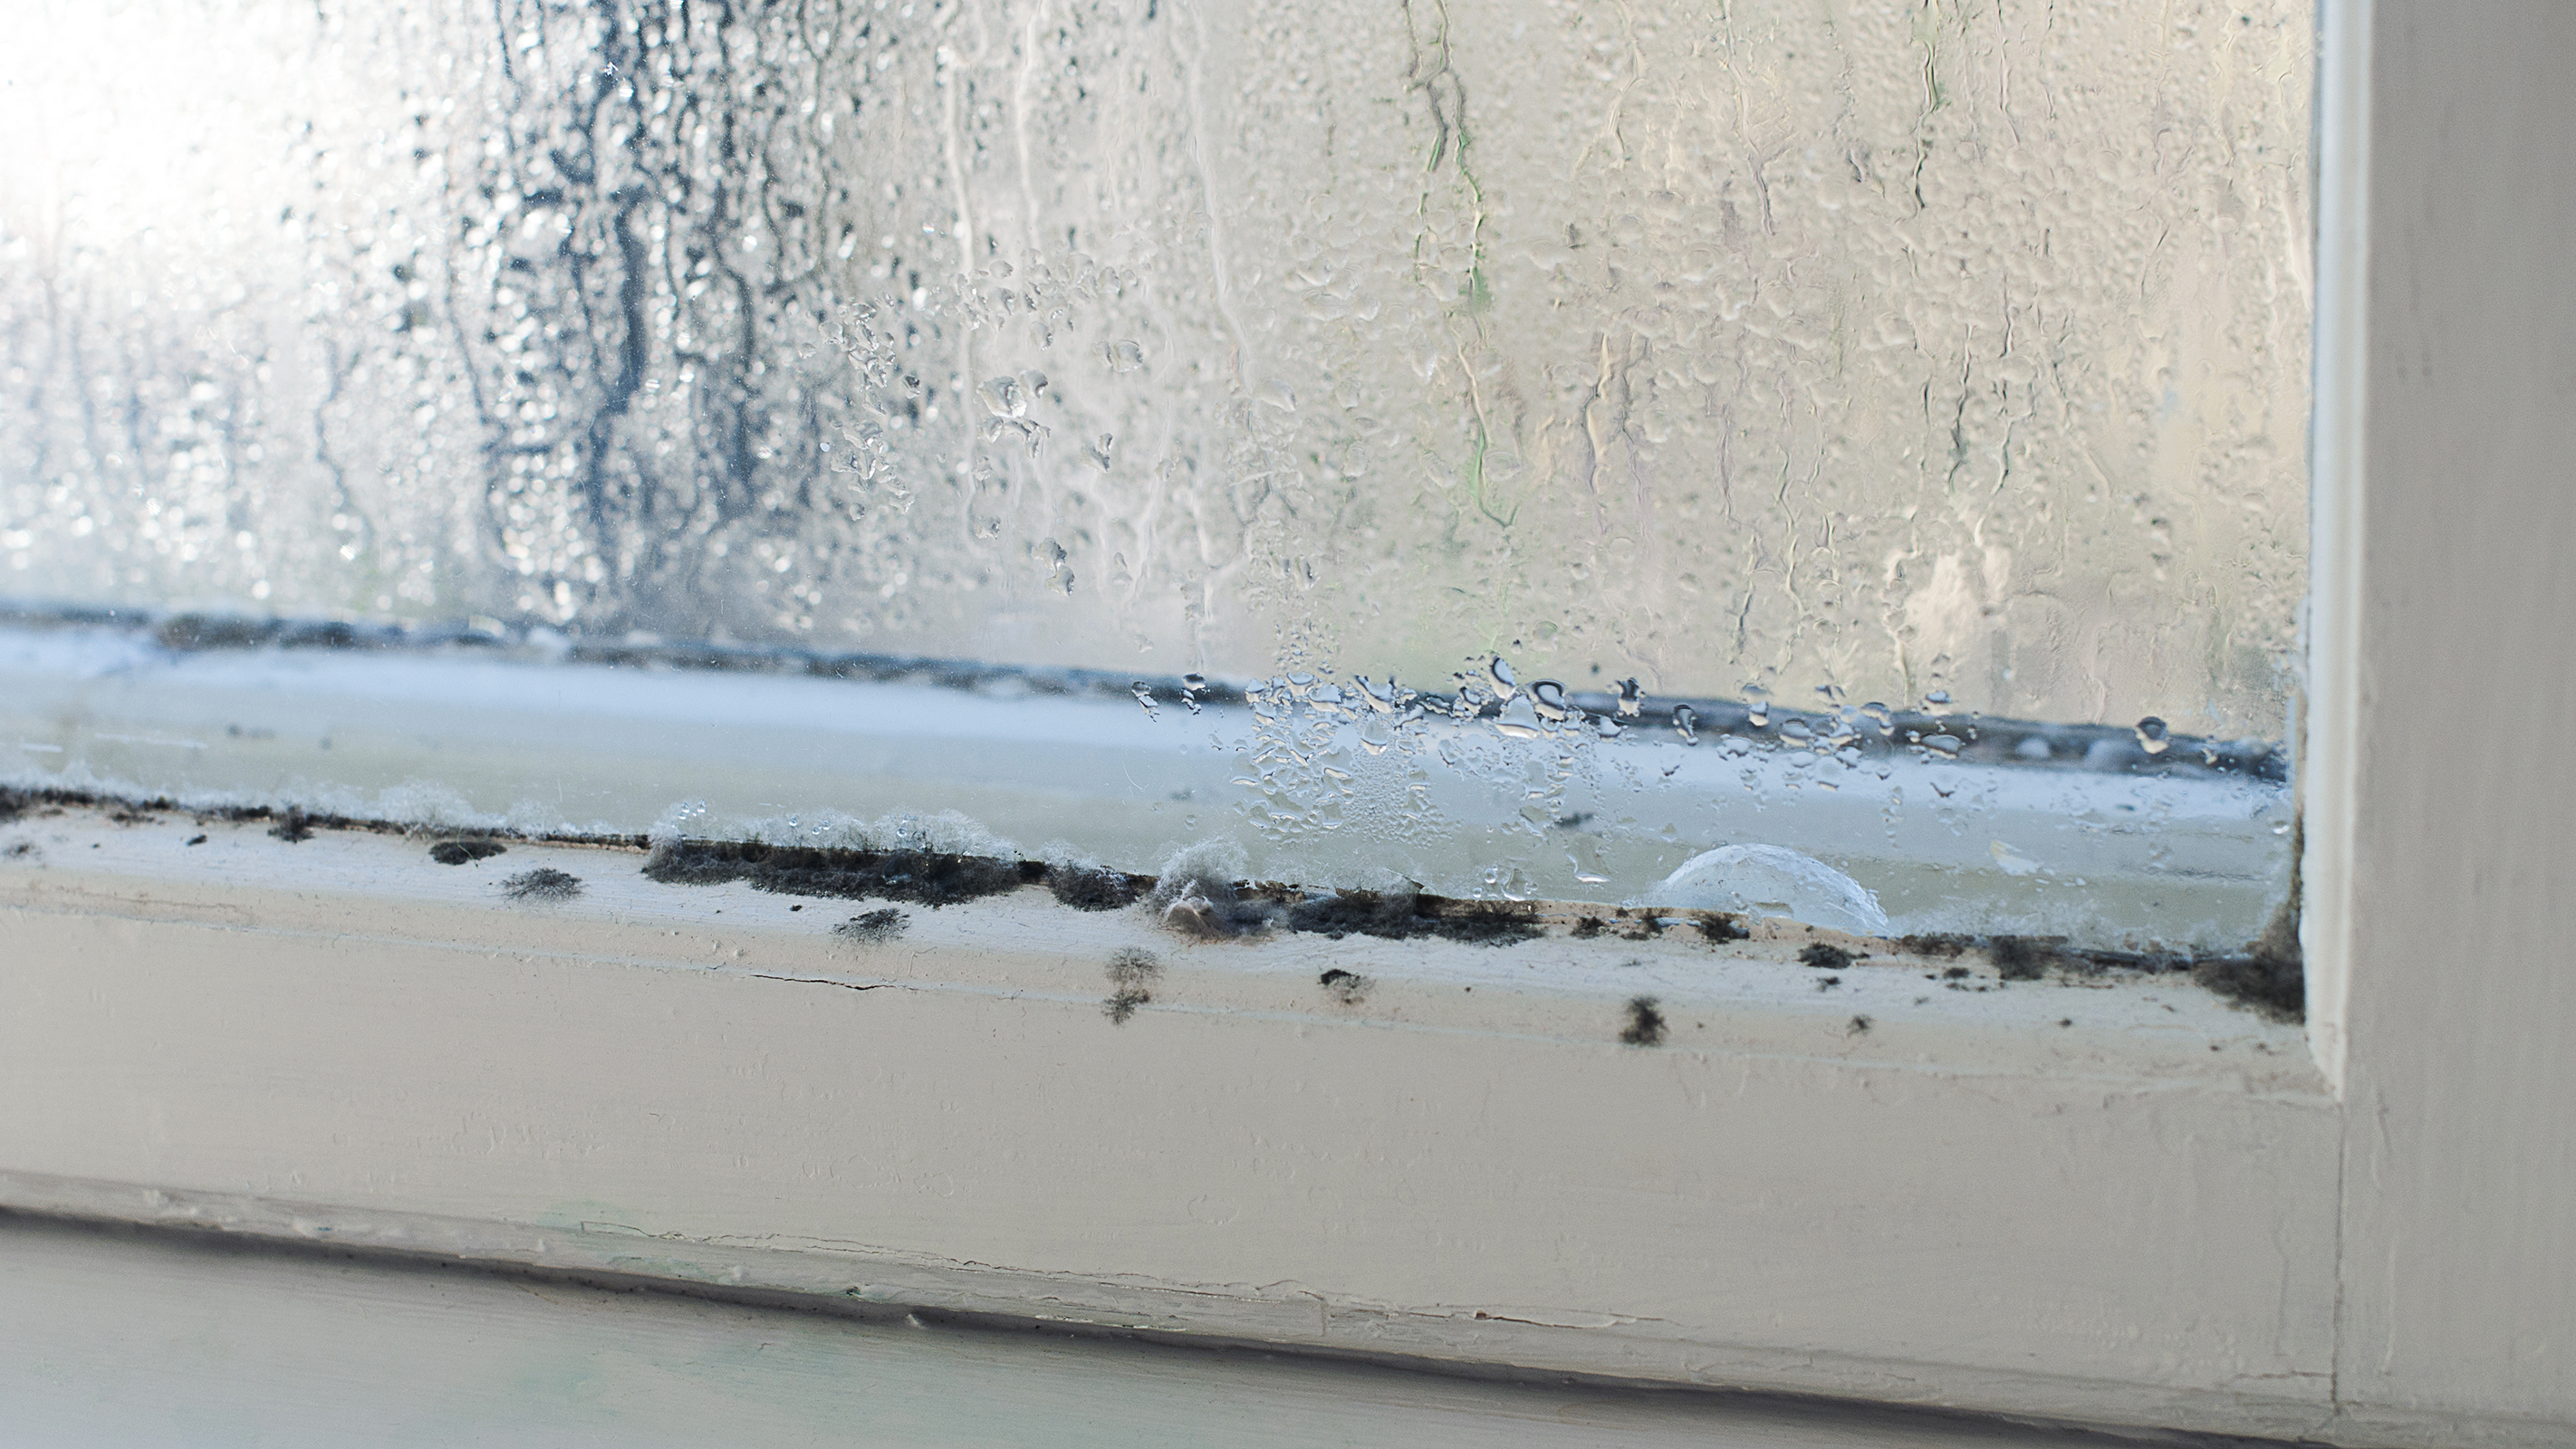 Window Condensation - Tips and Solutions - Repairs or replacements